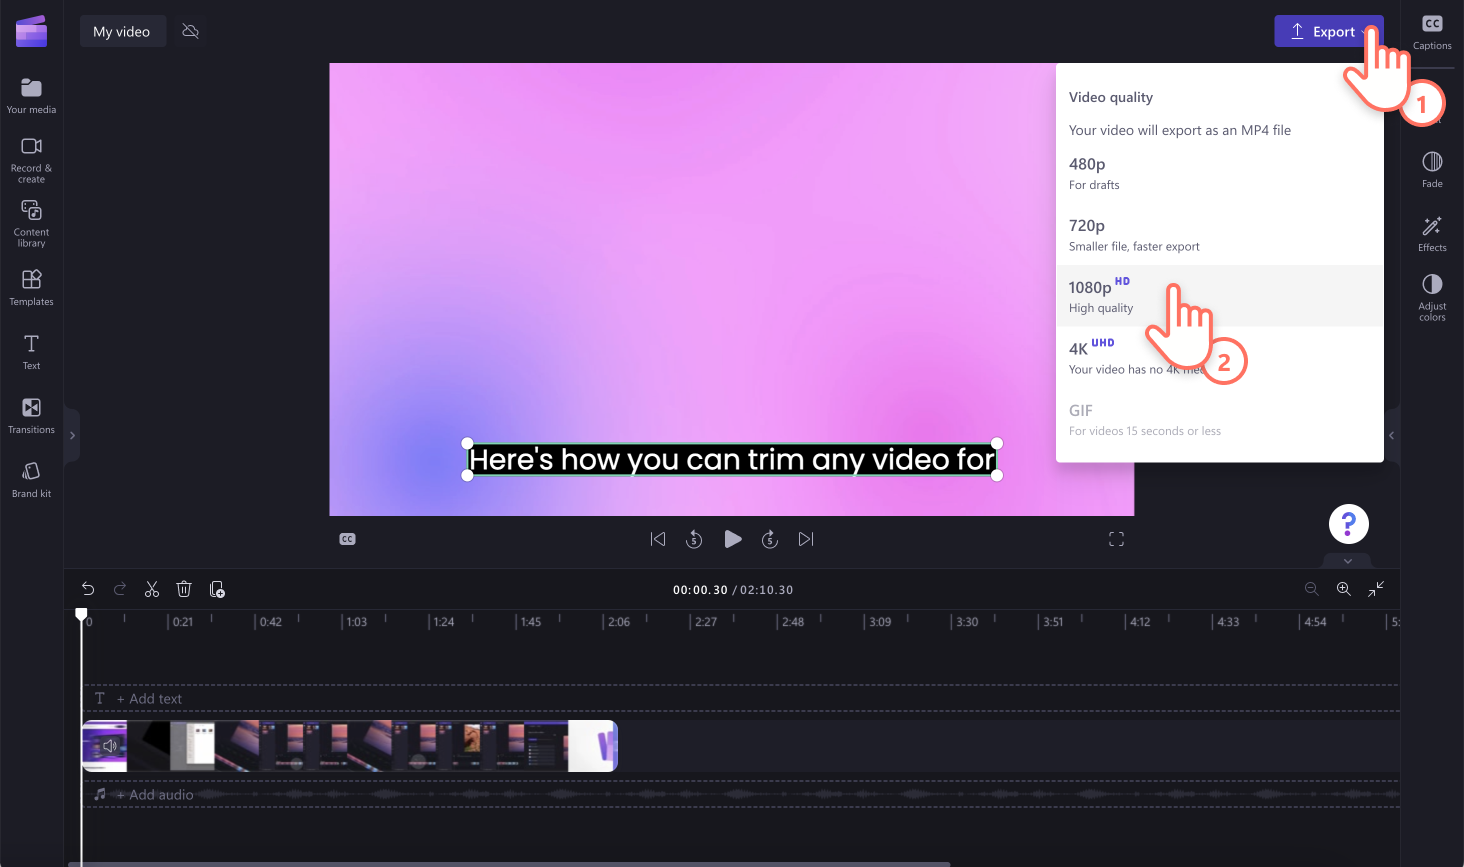 An image of a user saving their video.